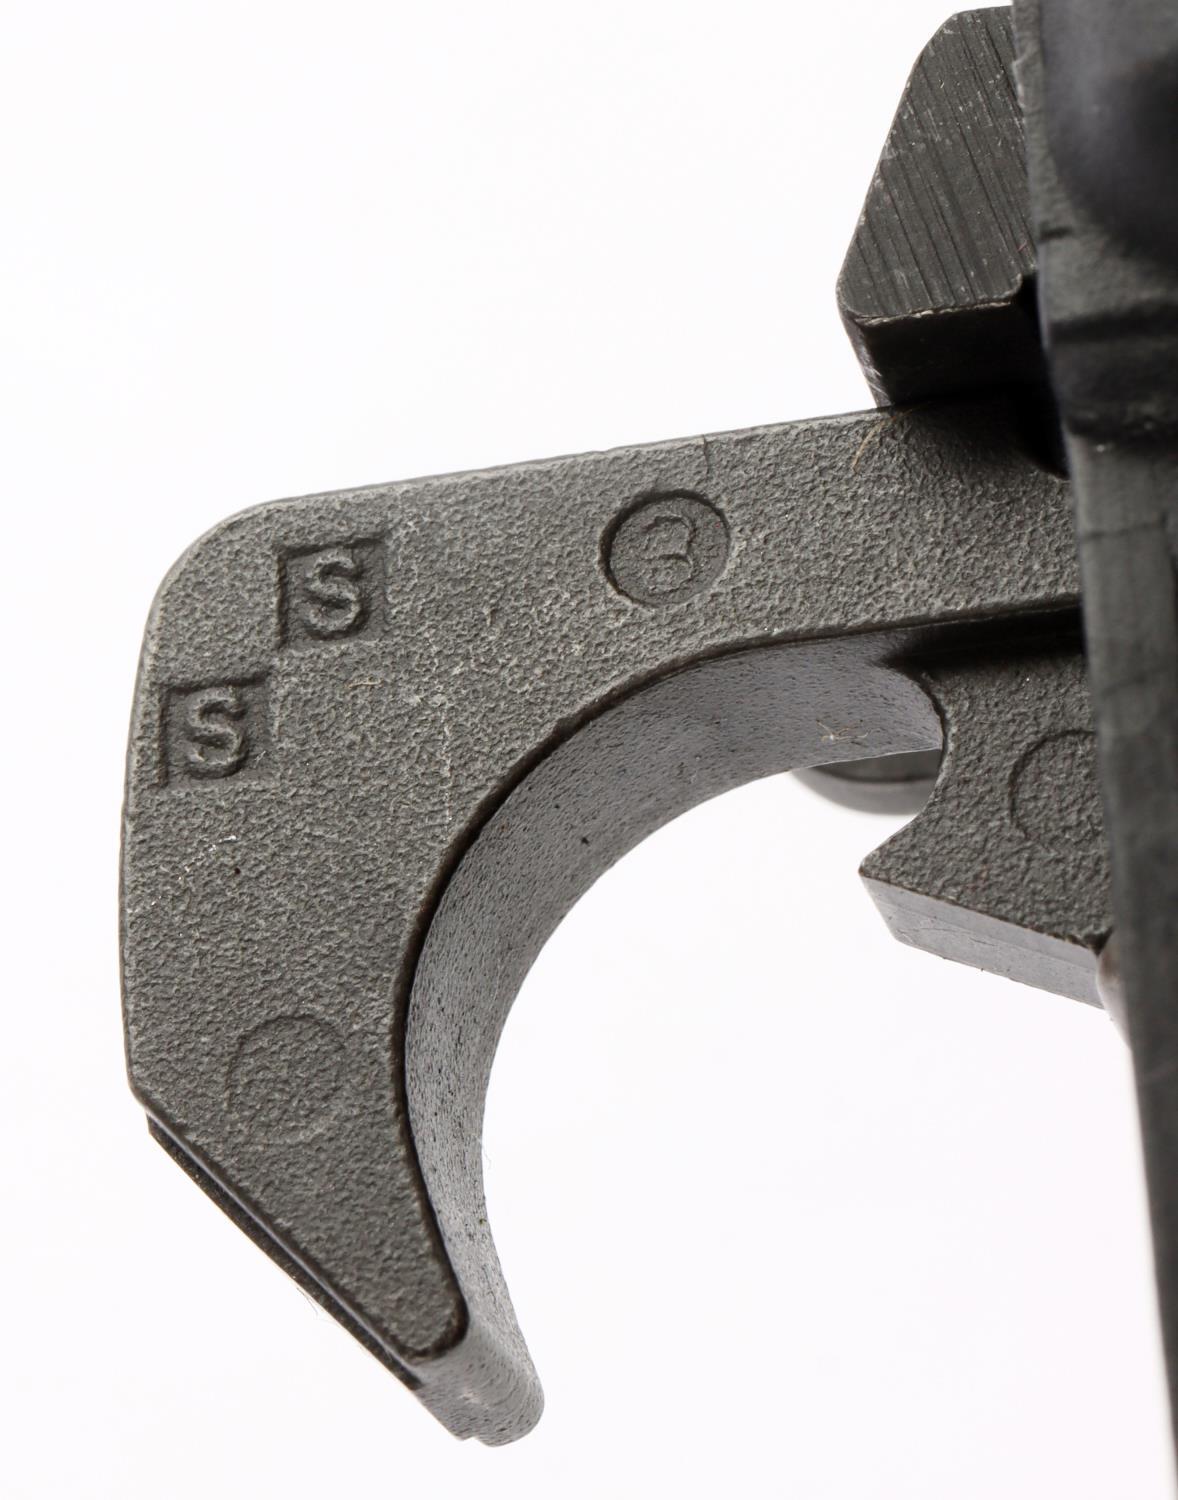 TENNESSEE ARMS AR-15 POLYMER LOWER RECEIVER